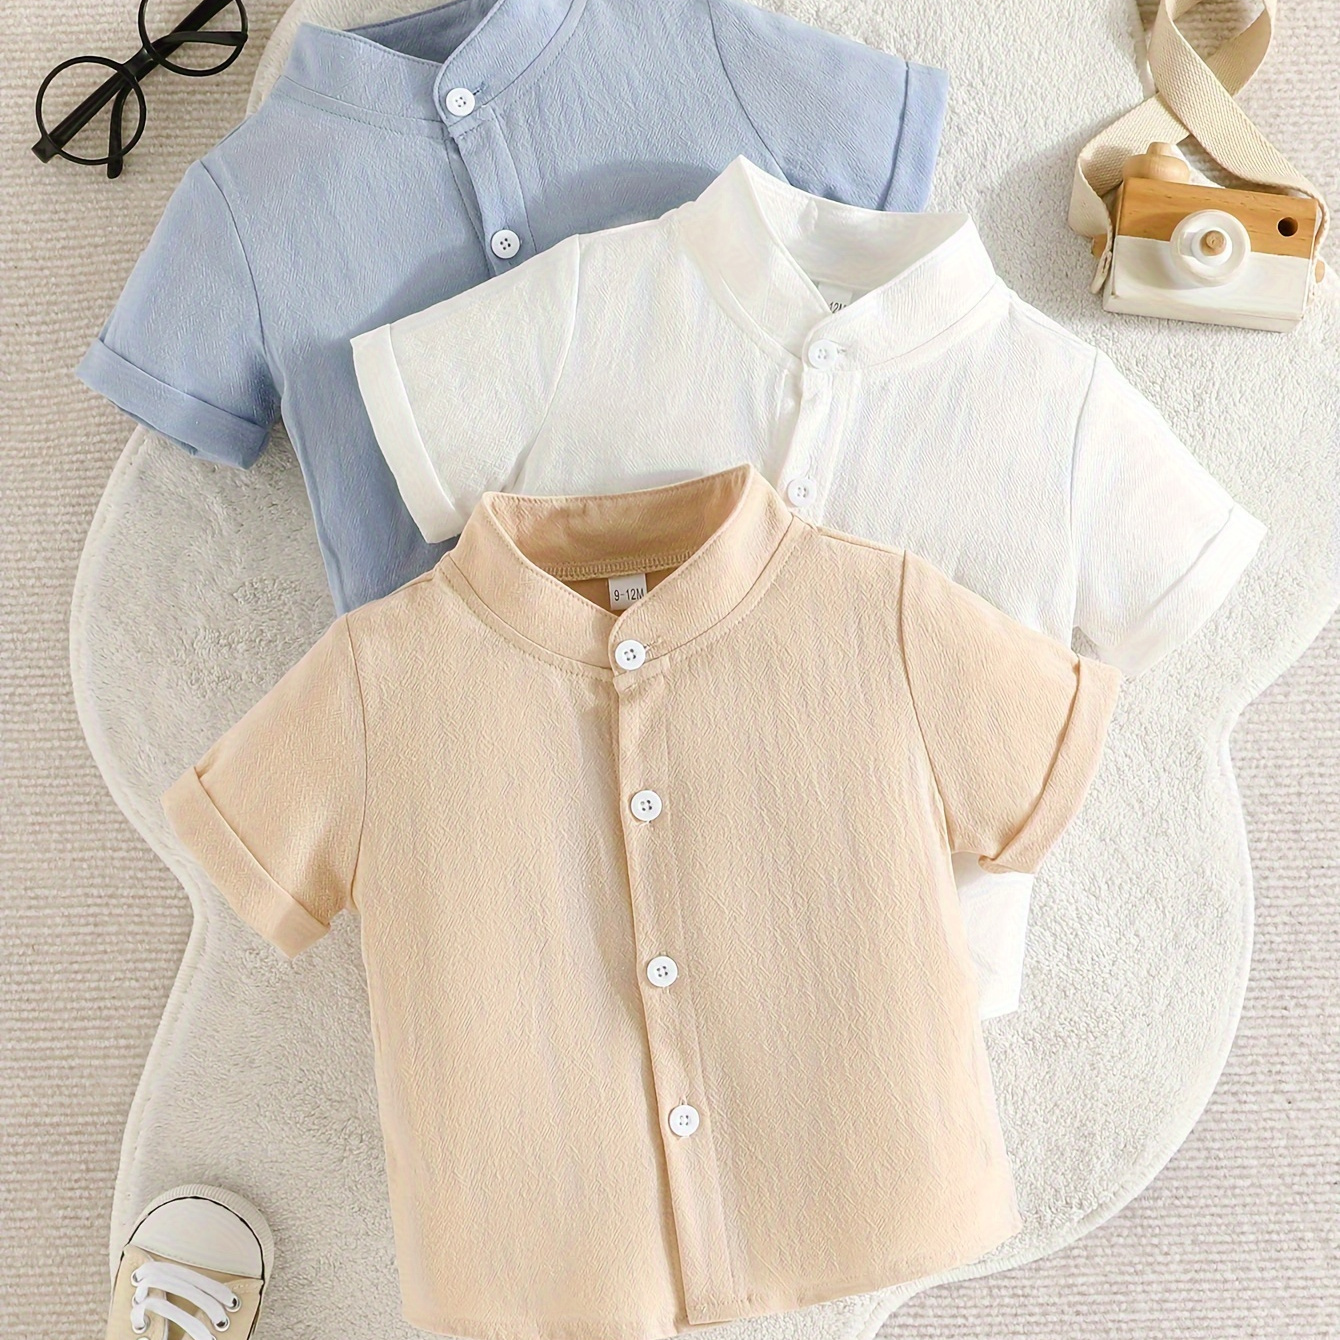 

3pcs Infant & Toddler's Solid Color Shirt, Mock Neck Casual Button Front Short Sleeve Top, Baby Boy's Clothing